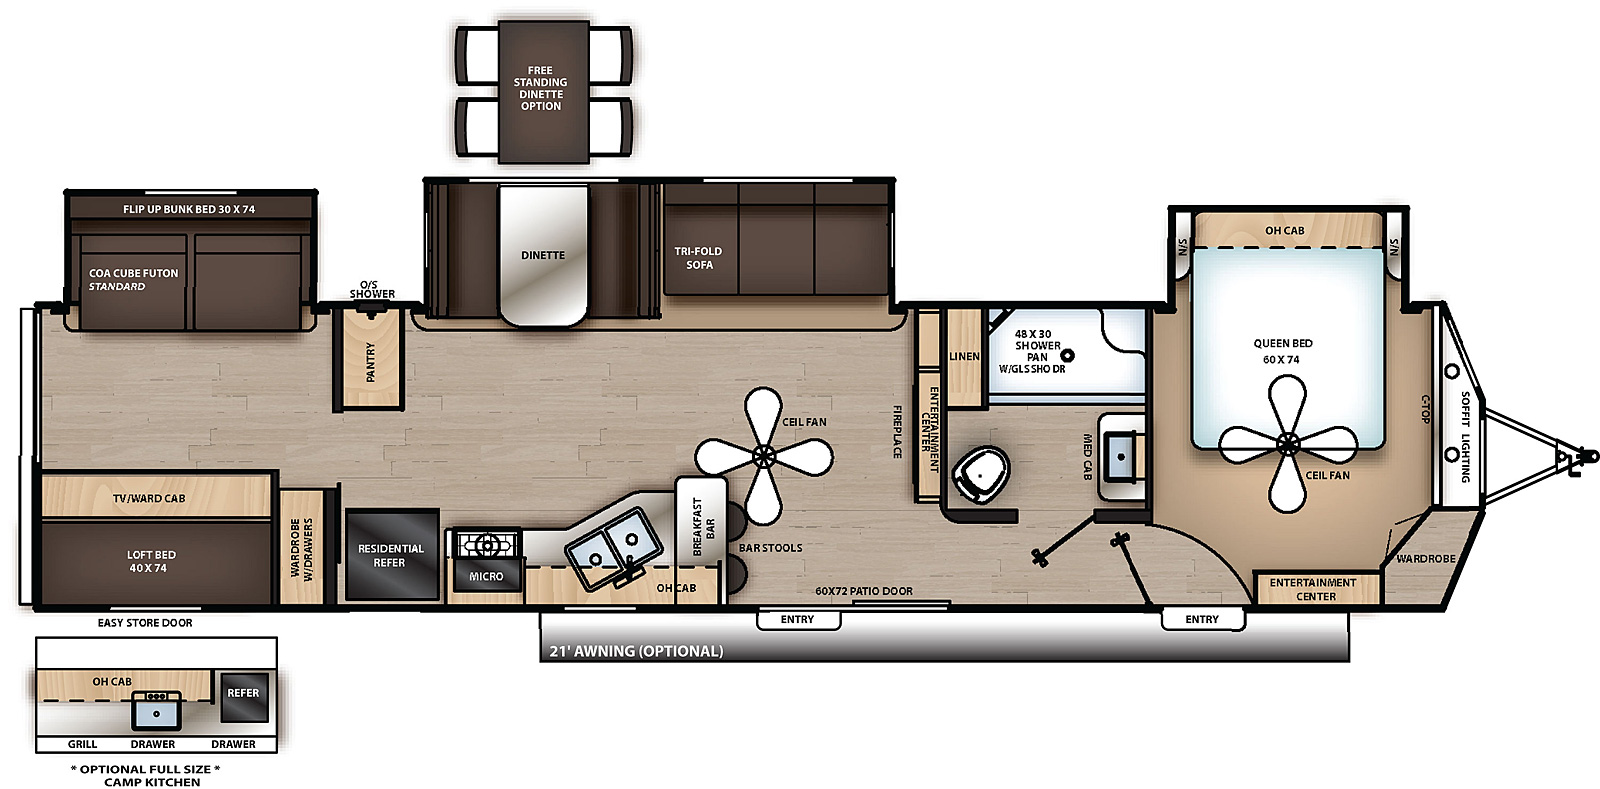 The 40BHTS has three slide outs on the off-door side and two entry doors on the door side. Interior layout from front to back: front bedroom with off door side slide out containing side facing queen bed, overhead cabinet, wardrobe, and entertainment center; off door side bathroom; entertainment center with fireplace; off-door side slide out containing sofa and dinette; door side kitchen containing bar with stools, double basin sink, overhead cabinet, cook top stove, microwave cabinet, and refrigerator; off door side pantry; and rear room with off door side slide out containing sofa with bunk and loft bed over wardrobe.